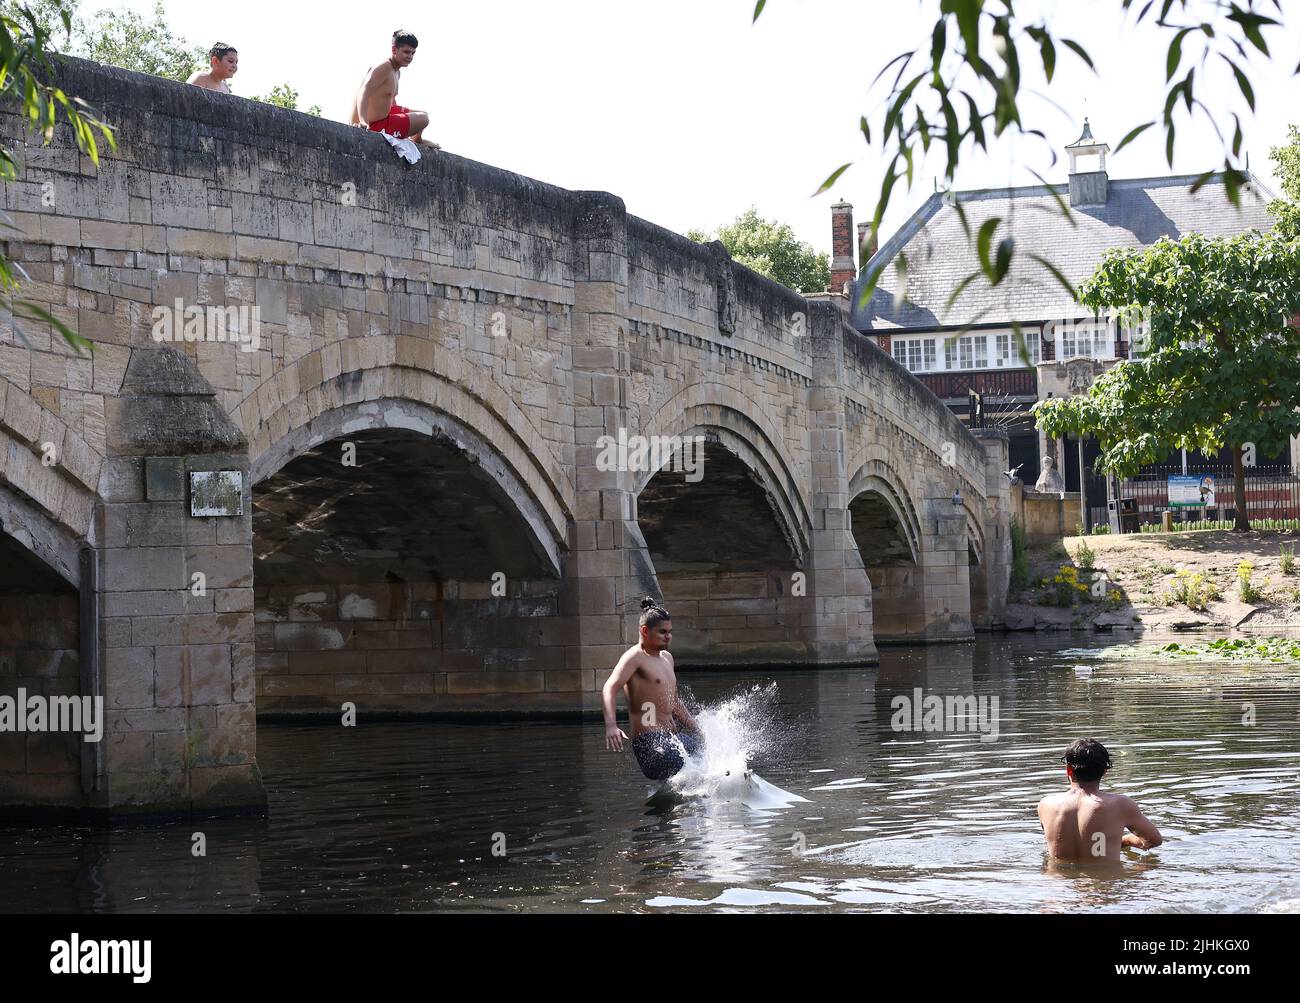 Leicester, Leicestershire, UK. 19th July2022. UK weather. A youth jumps into the River Soar in Abbey Park during record breaking hot weather. The UK has recorded a temperatures of over 40C (104F) for the first time. Credit Darren Staples/Alamy Live News. Stock Photo